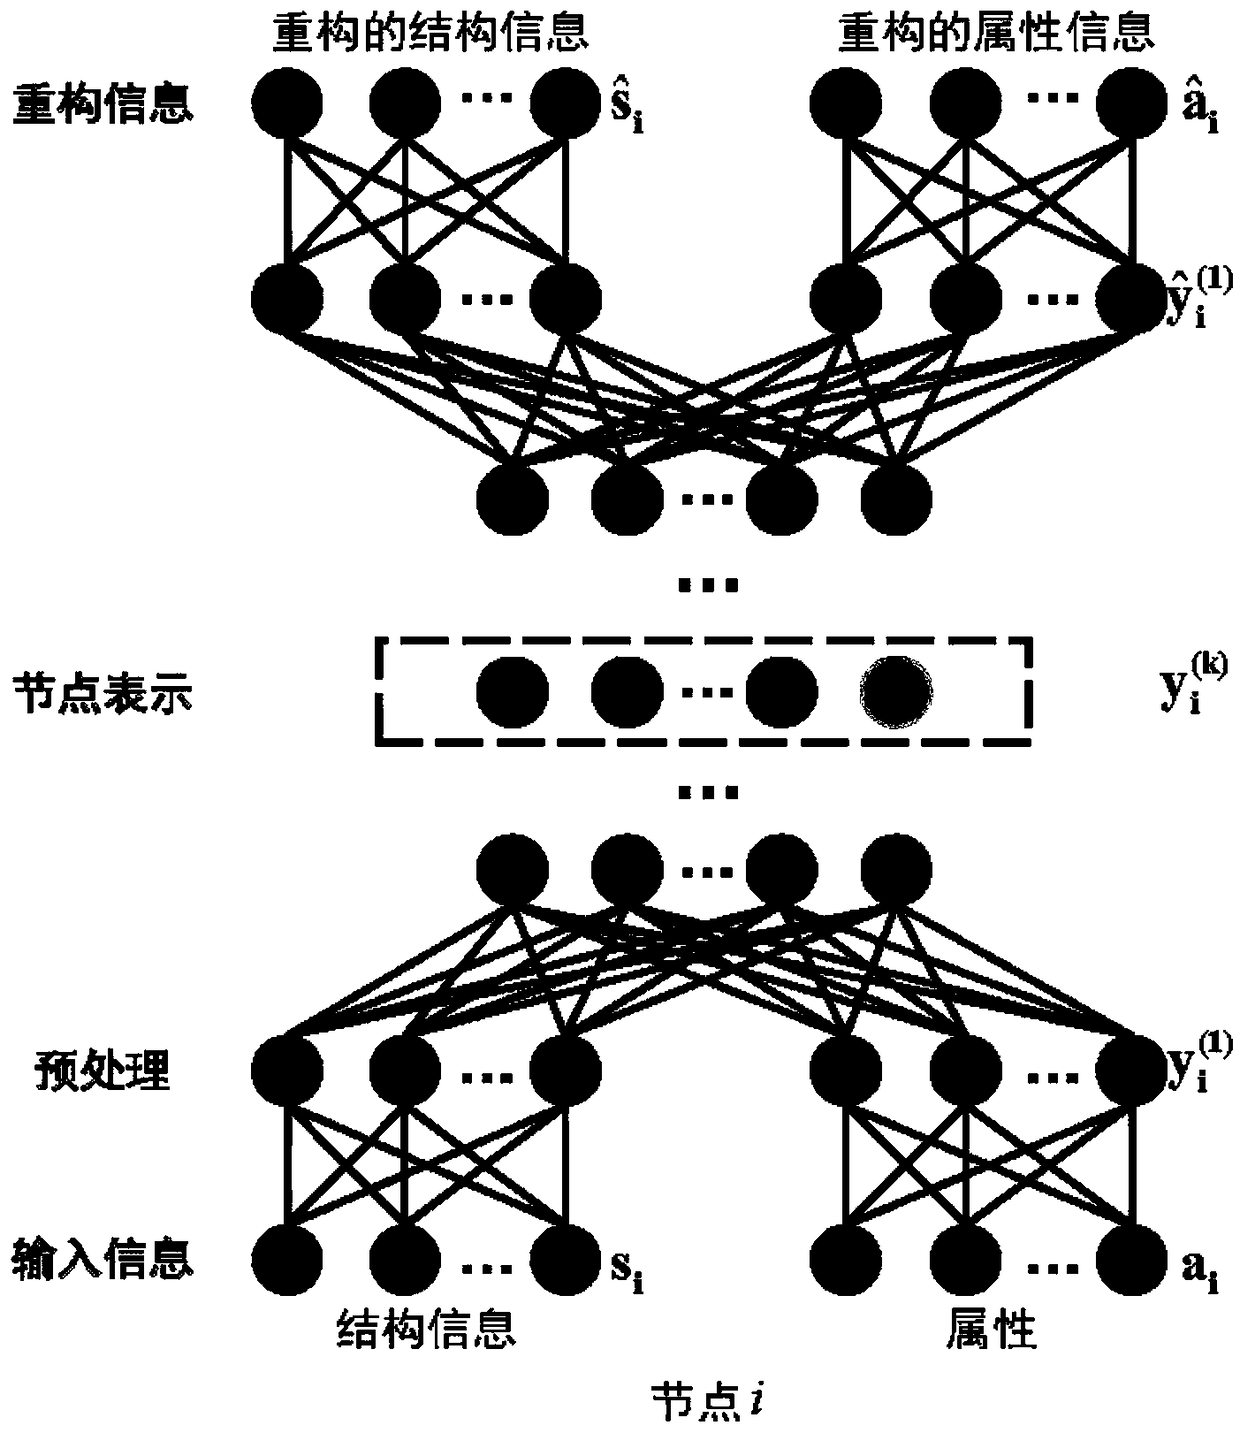 A multi-modal deep network embedding method for fusing structure and attribute information